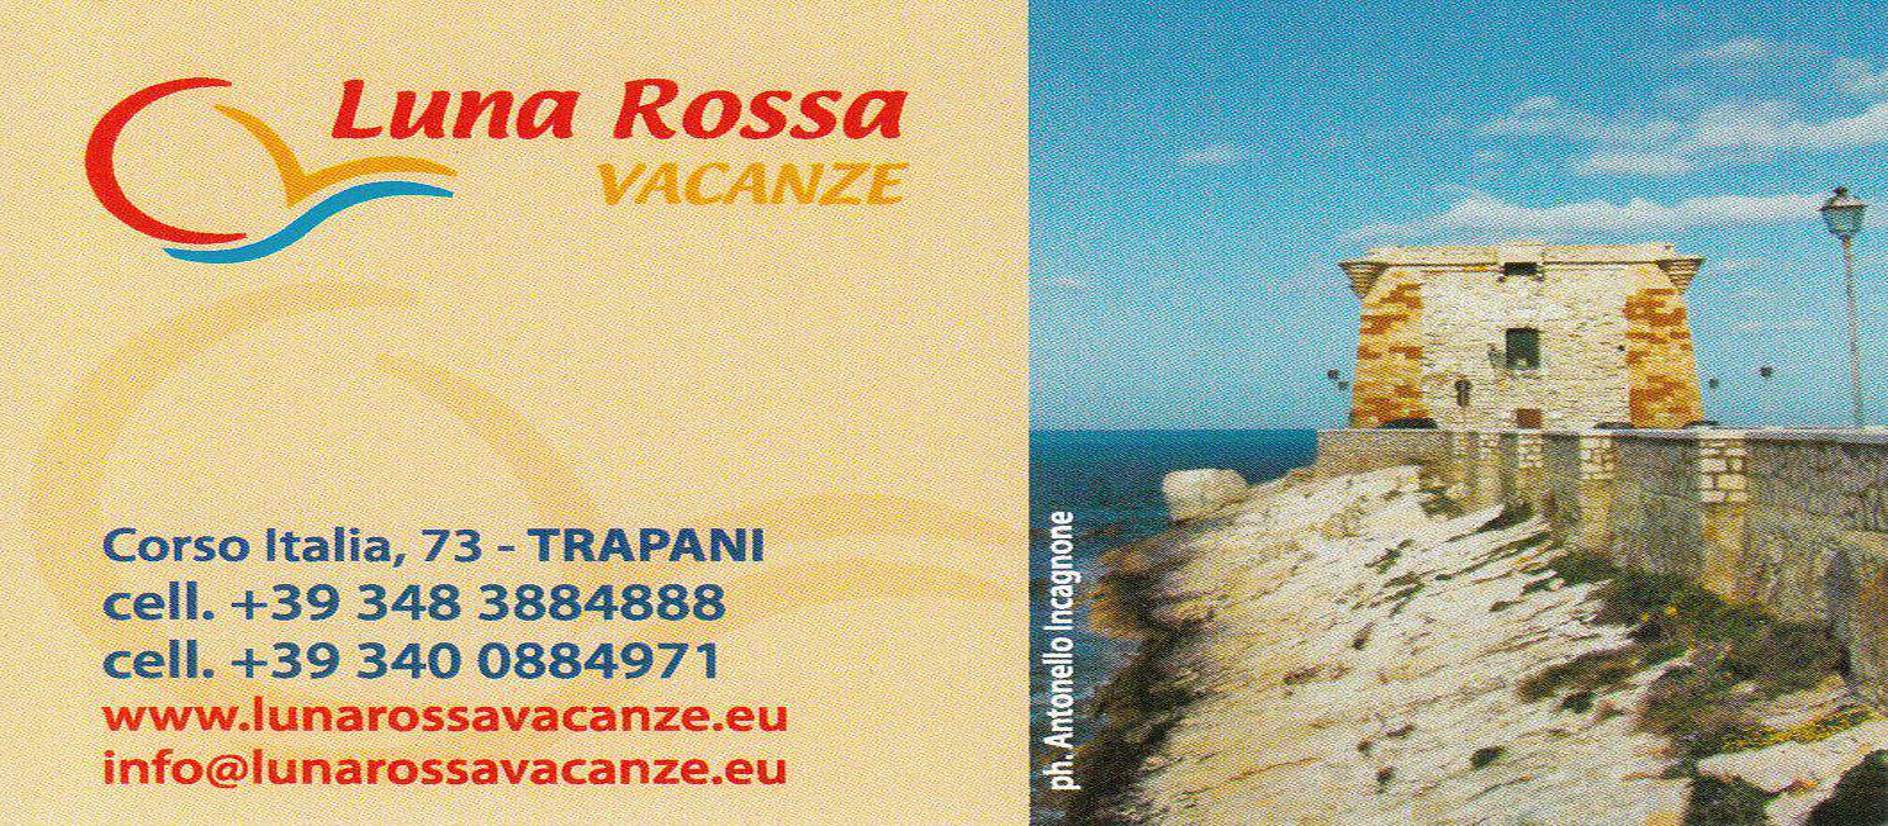 IN THE HEART OF TRAPANI HOLIDAYS 